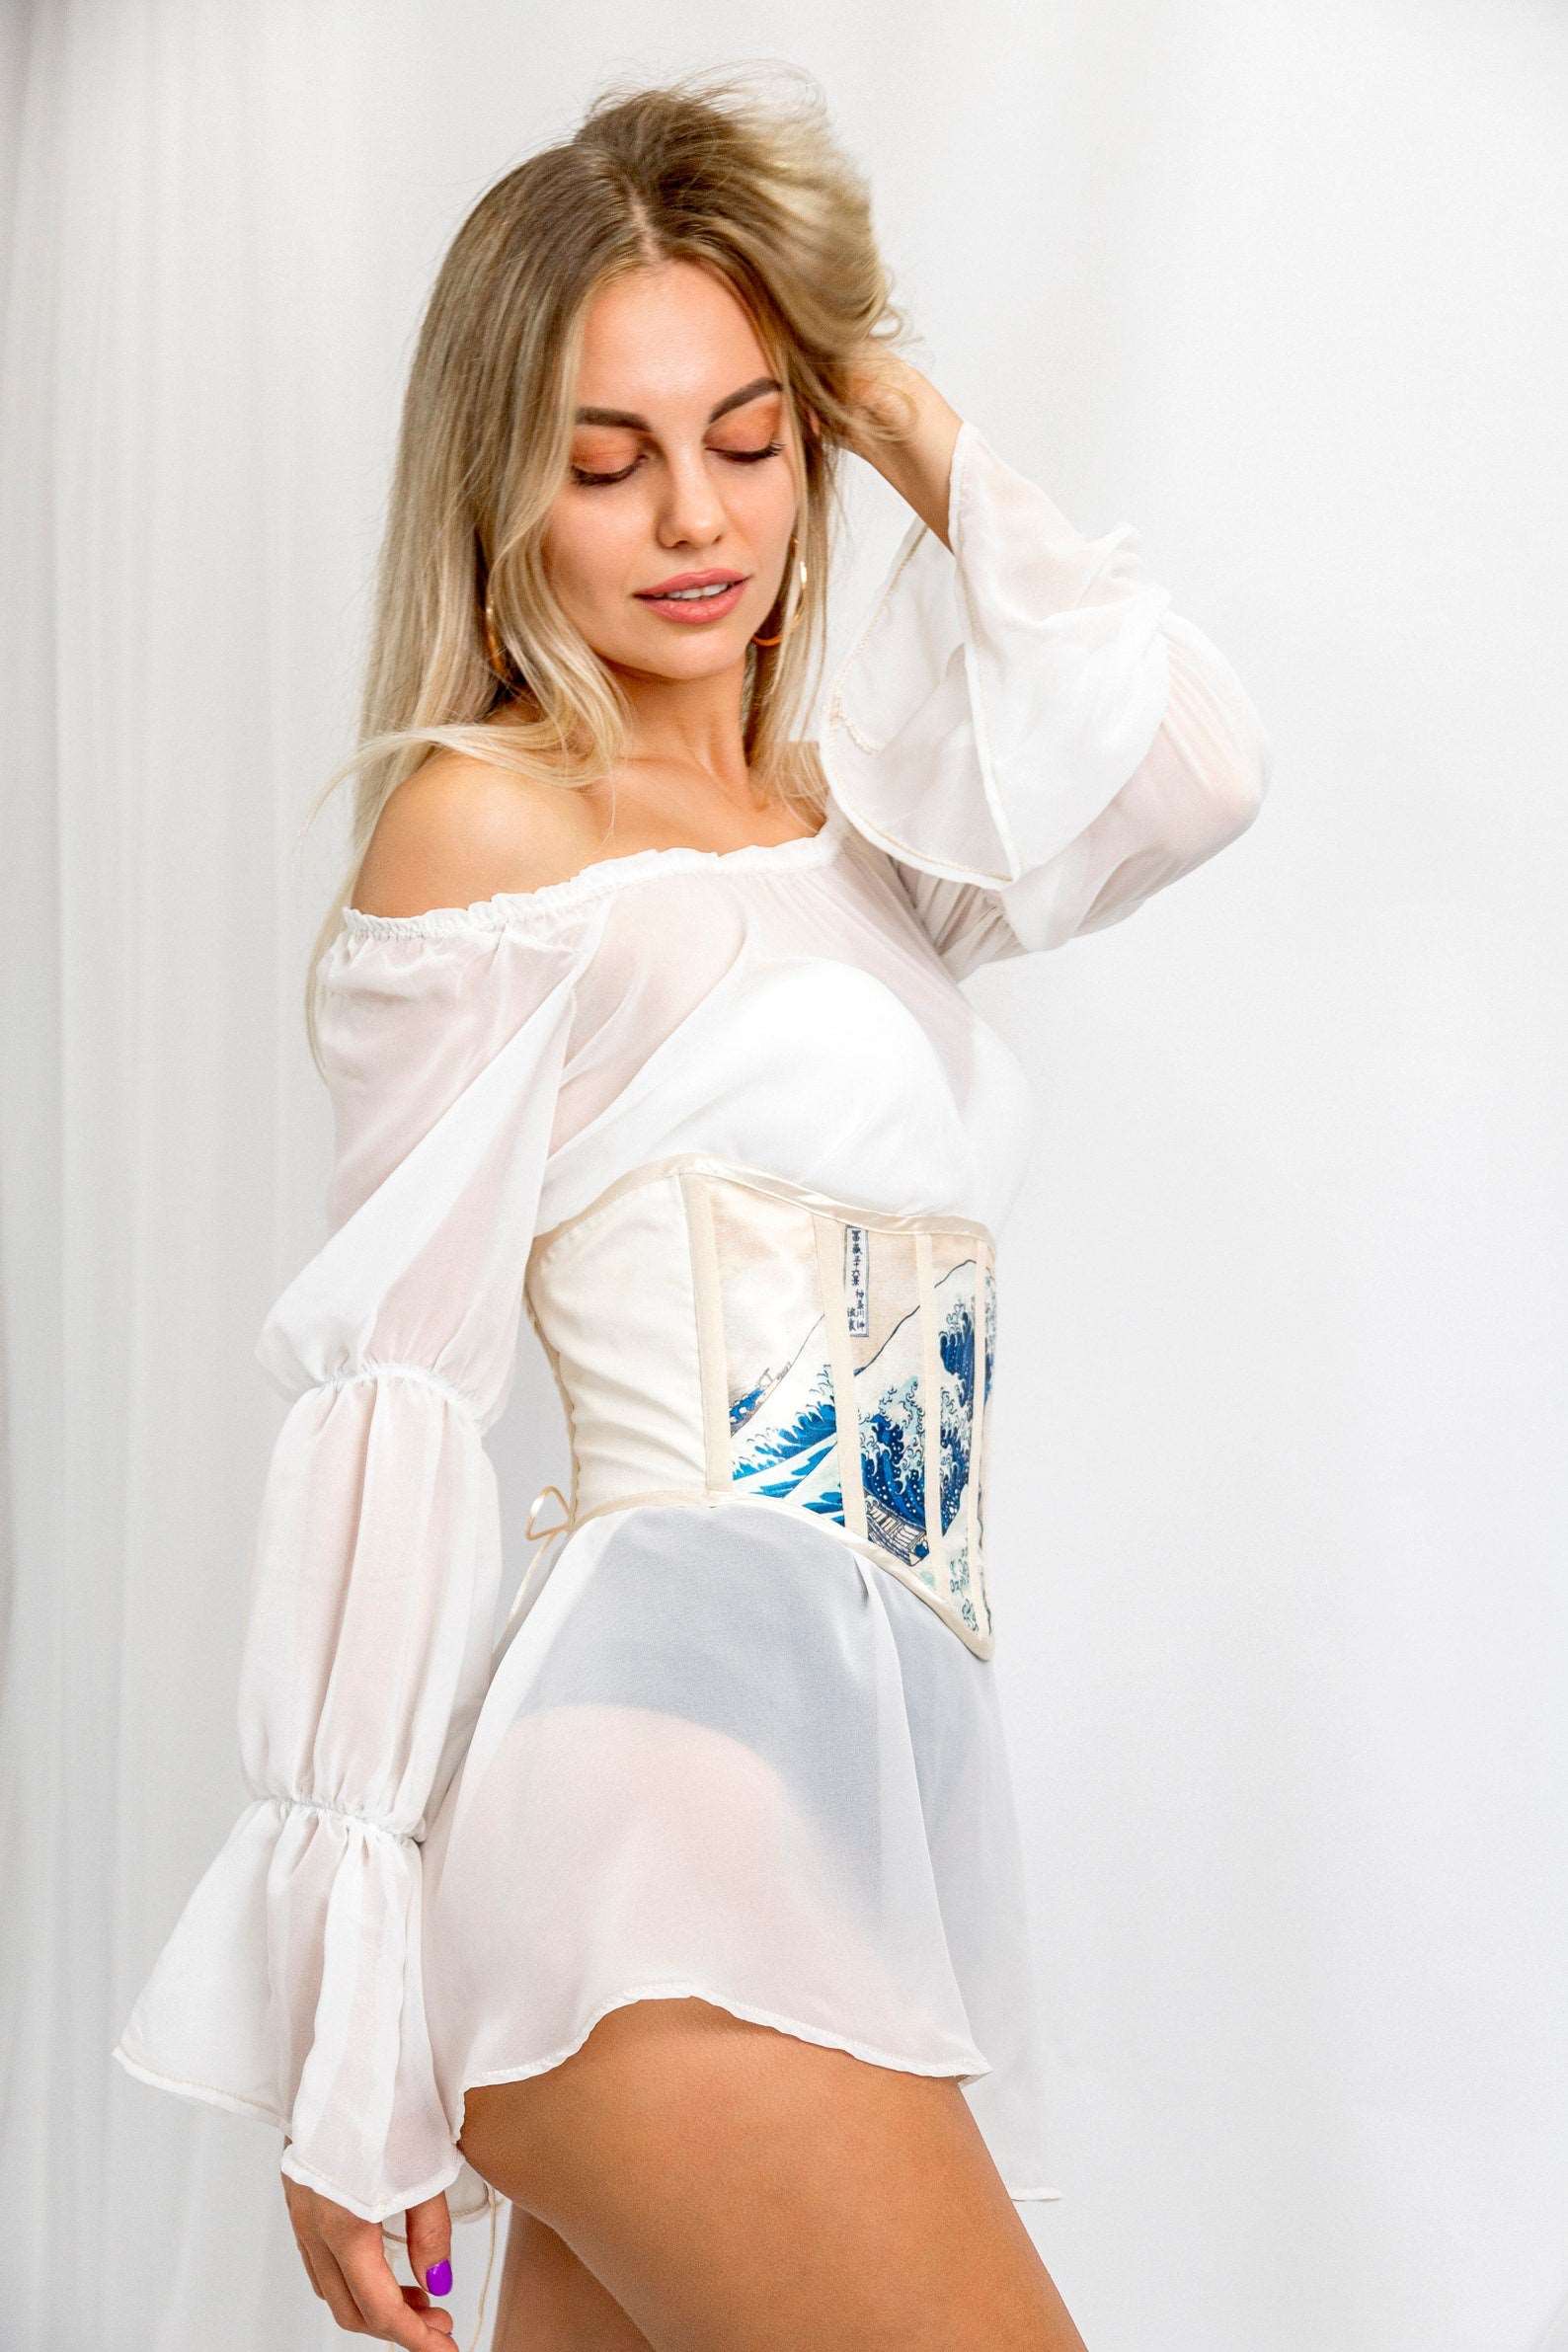 Waspie corset belt worn with a high-waisted skirt, perfect for a romantic look